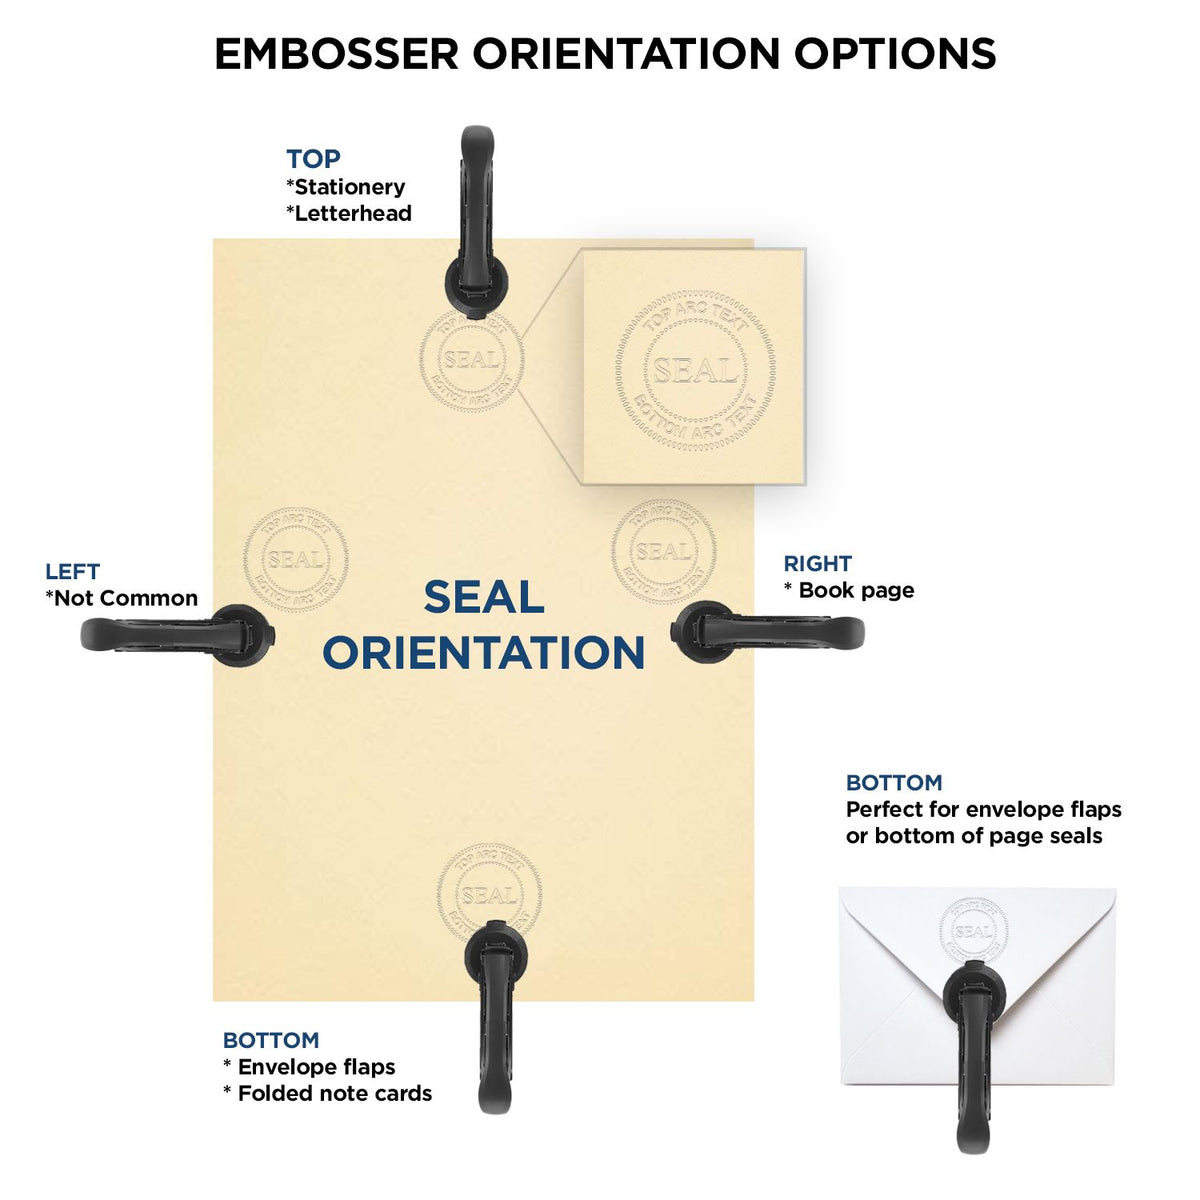 An infographic for the Handheld Hawaii Land Surveyor Seal showing embosser orientation, this is showing examples of a top, bottom, right and left insert.